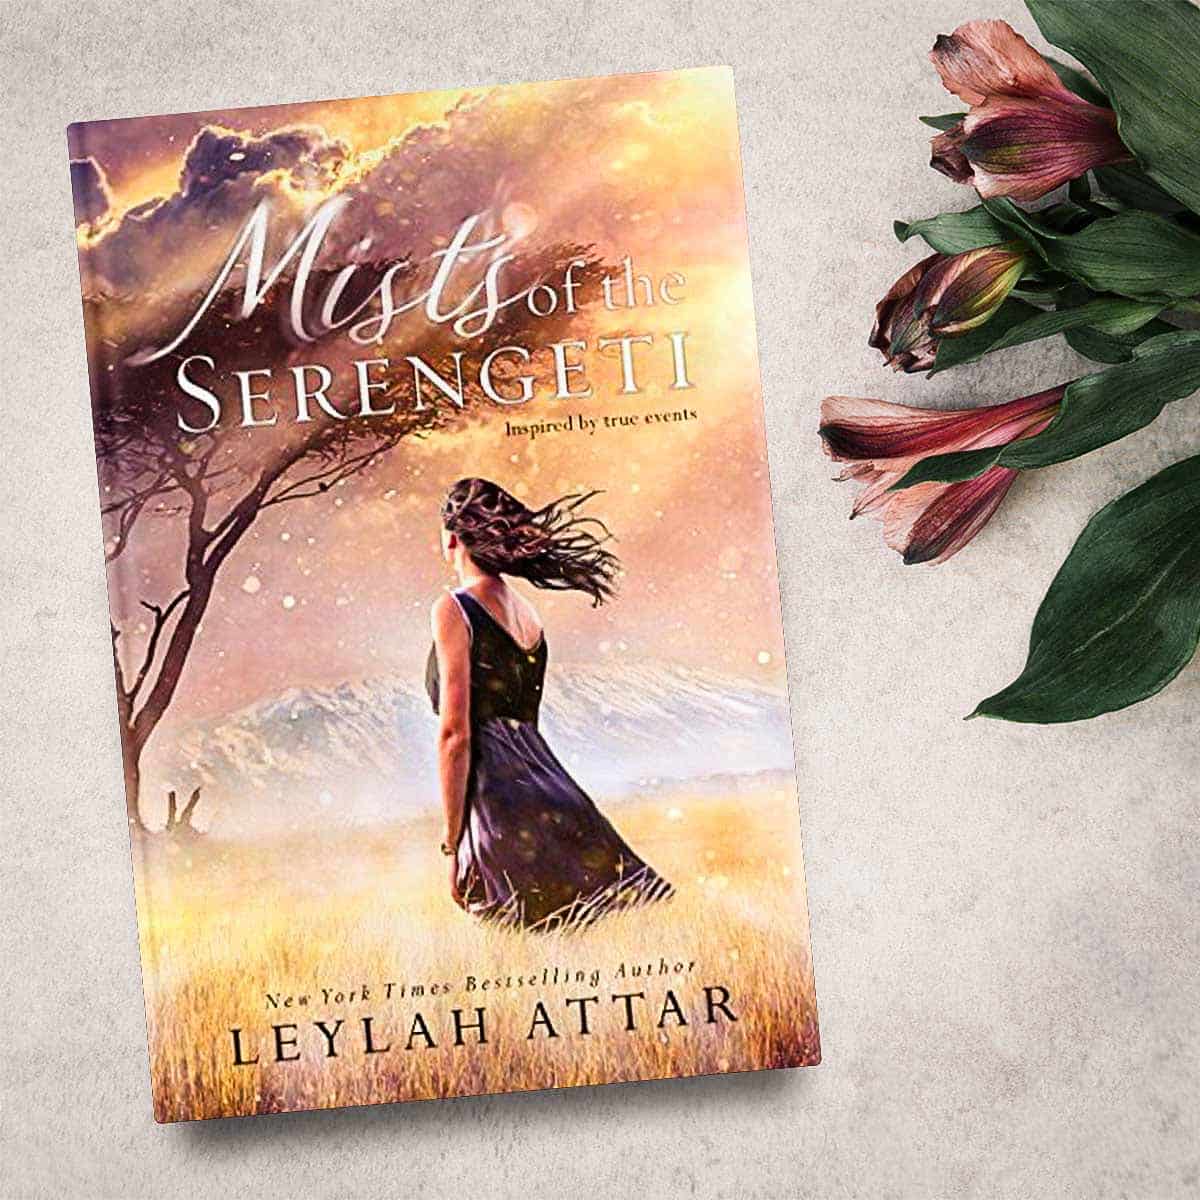 Mists of the Serengeti by Leylah Attar – Heartbreaking and Magical!